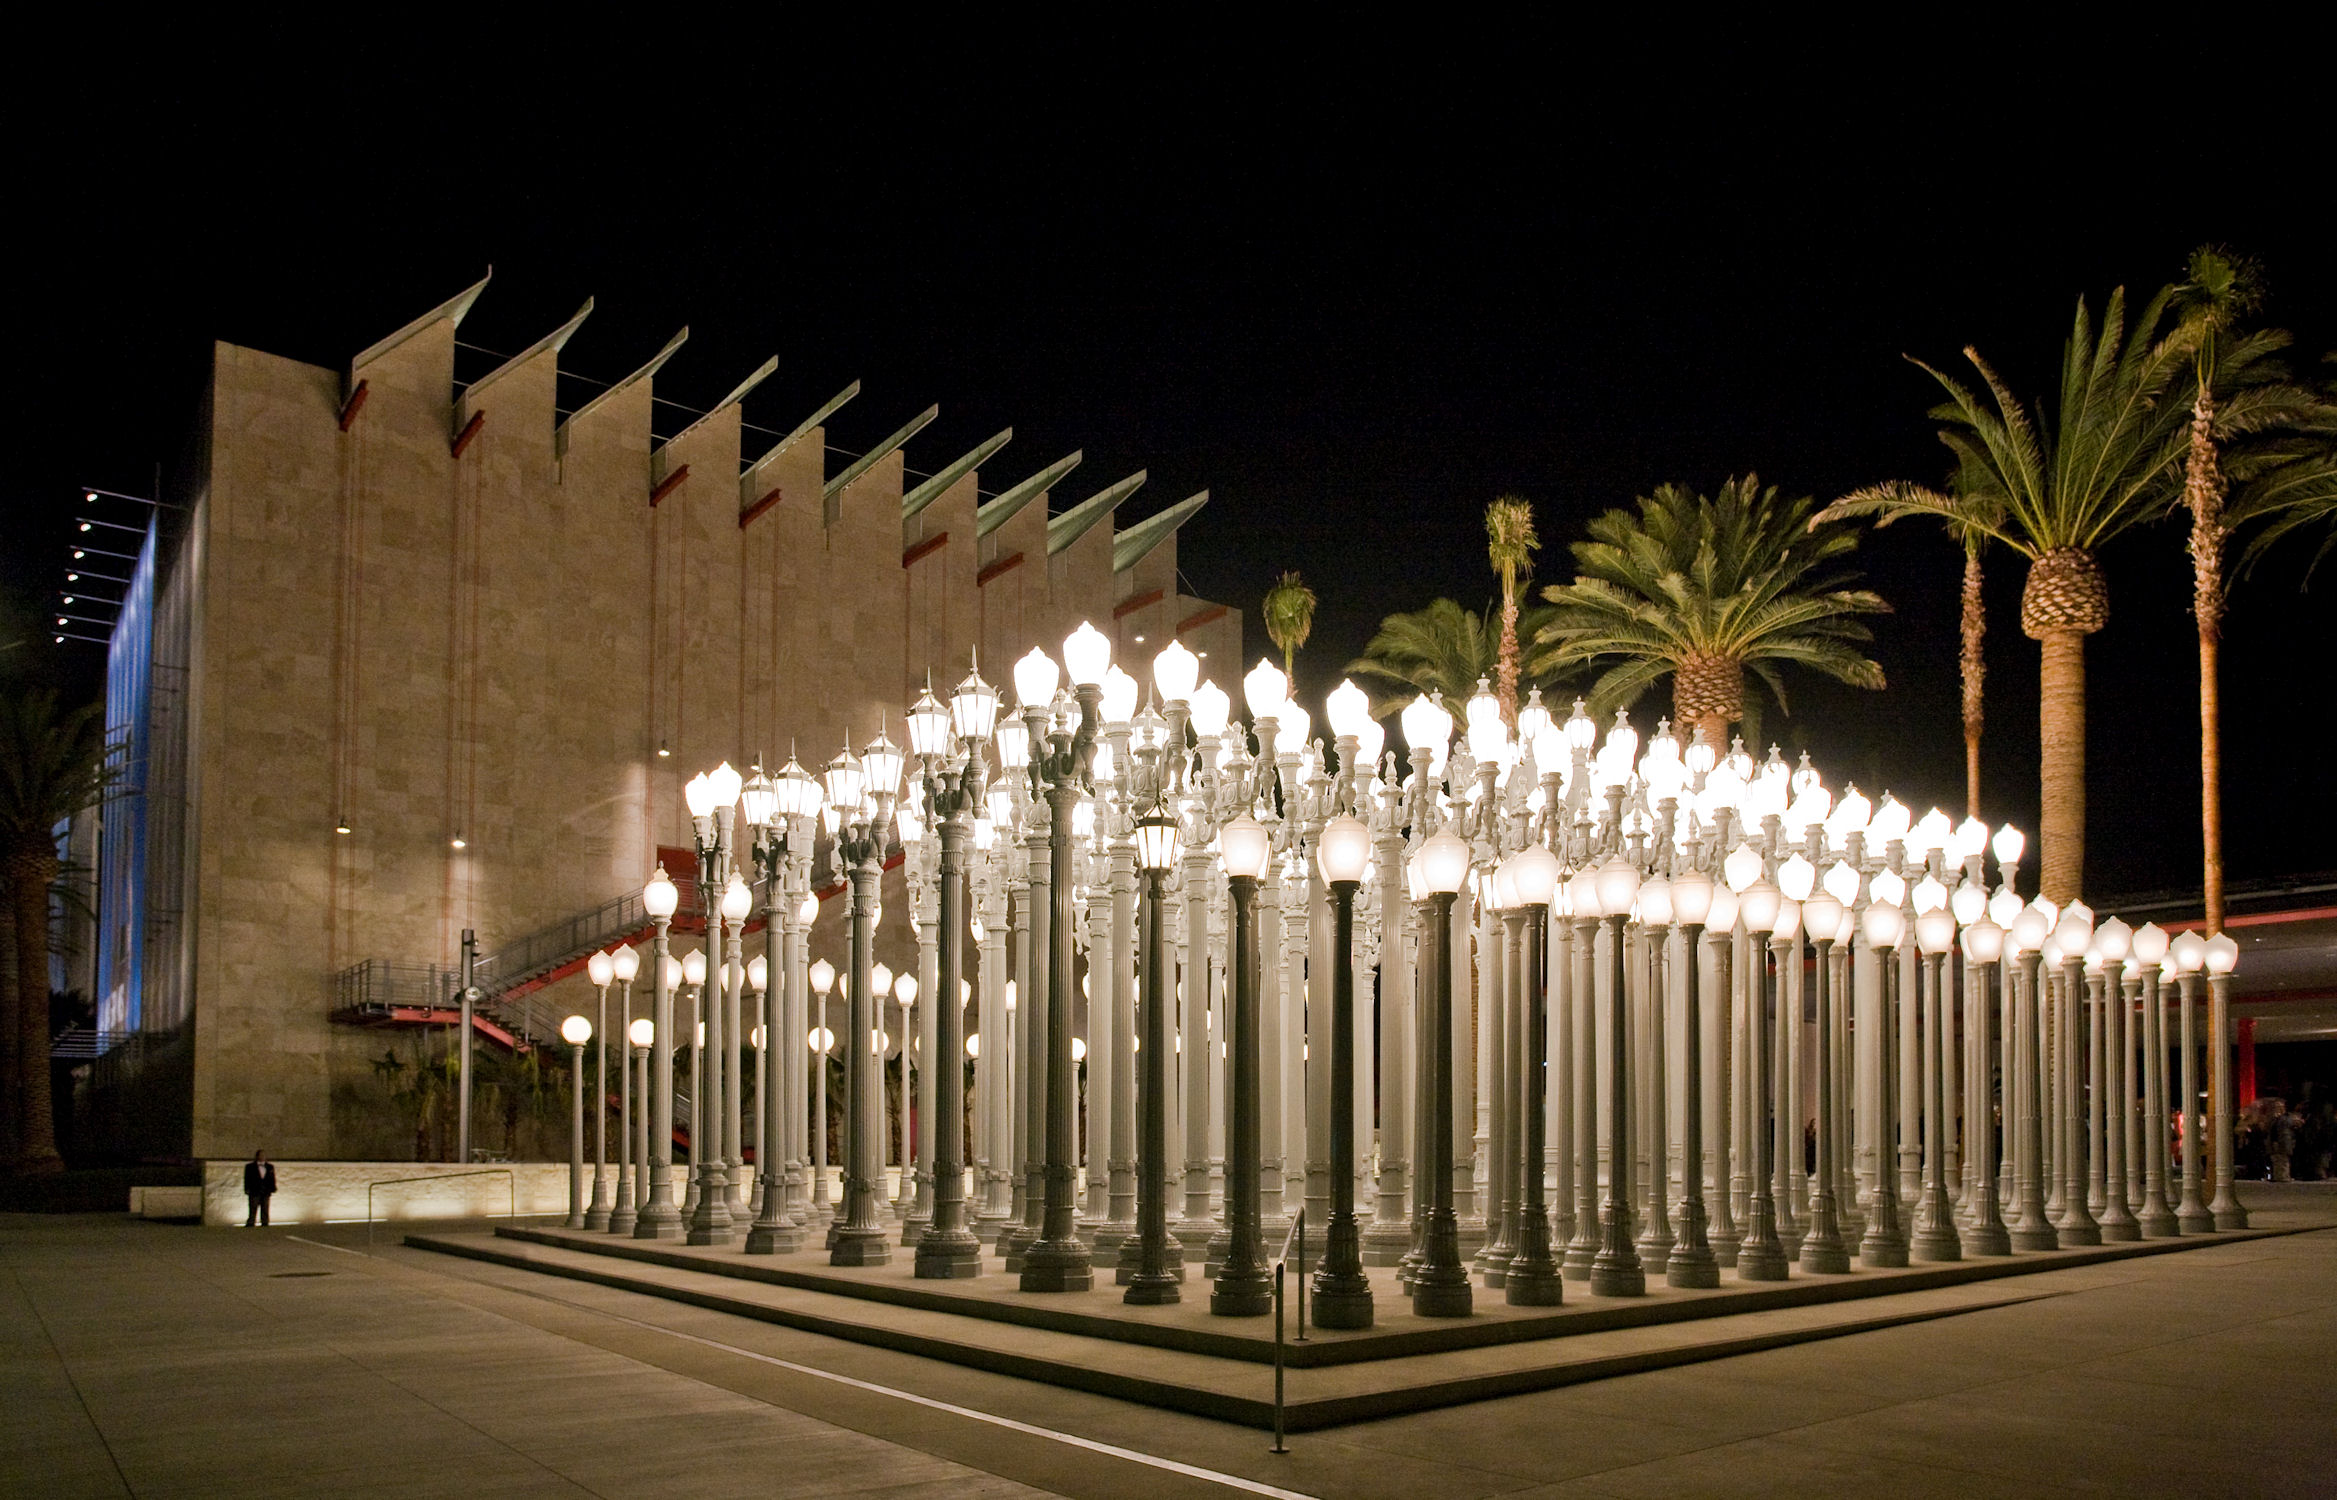 Chris Burden Urban Light, 2008, Los Angeles County Museum of Art, The Gordon Family Foundation's gift to "Transformation: The LACMA Campaign" (M.2007.147.1-.202) Photo © Museum Associates/ LACMA